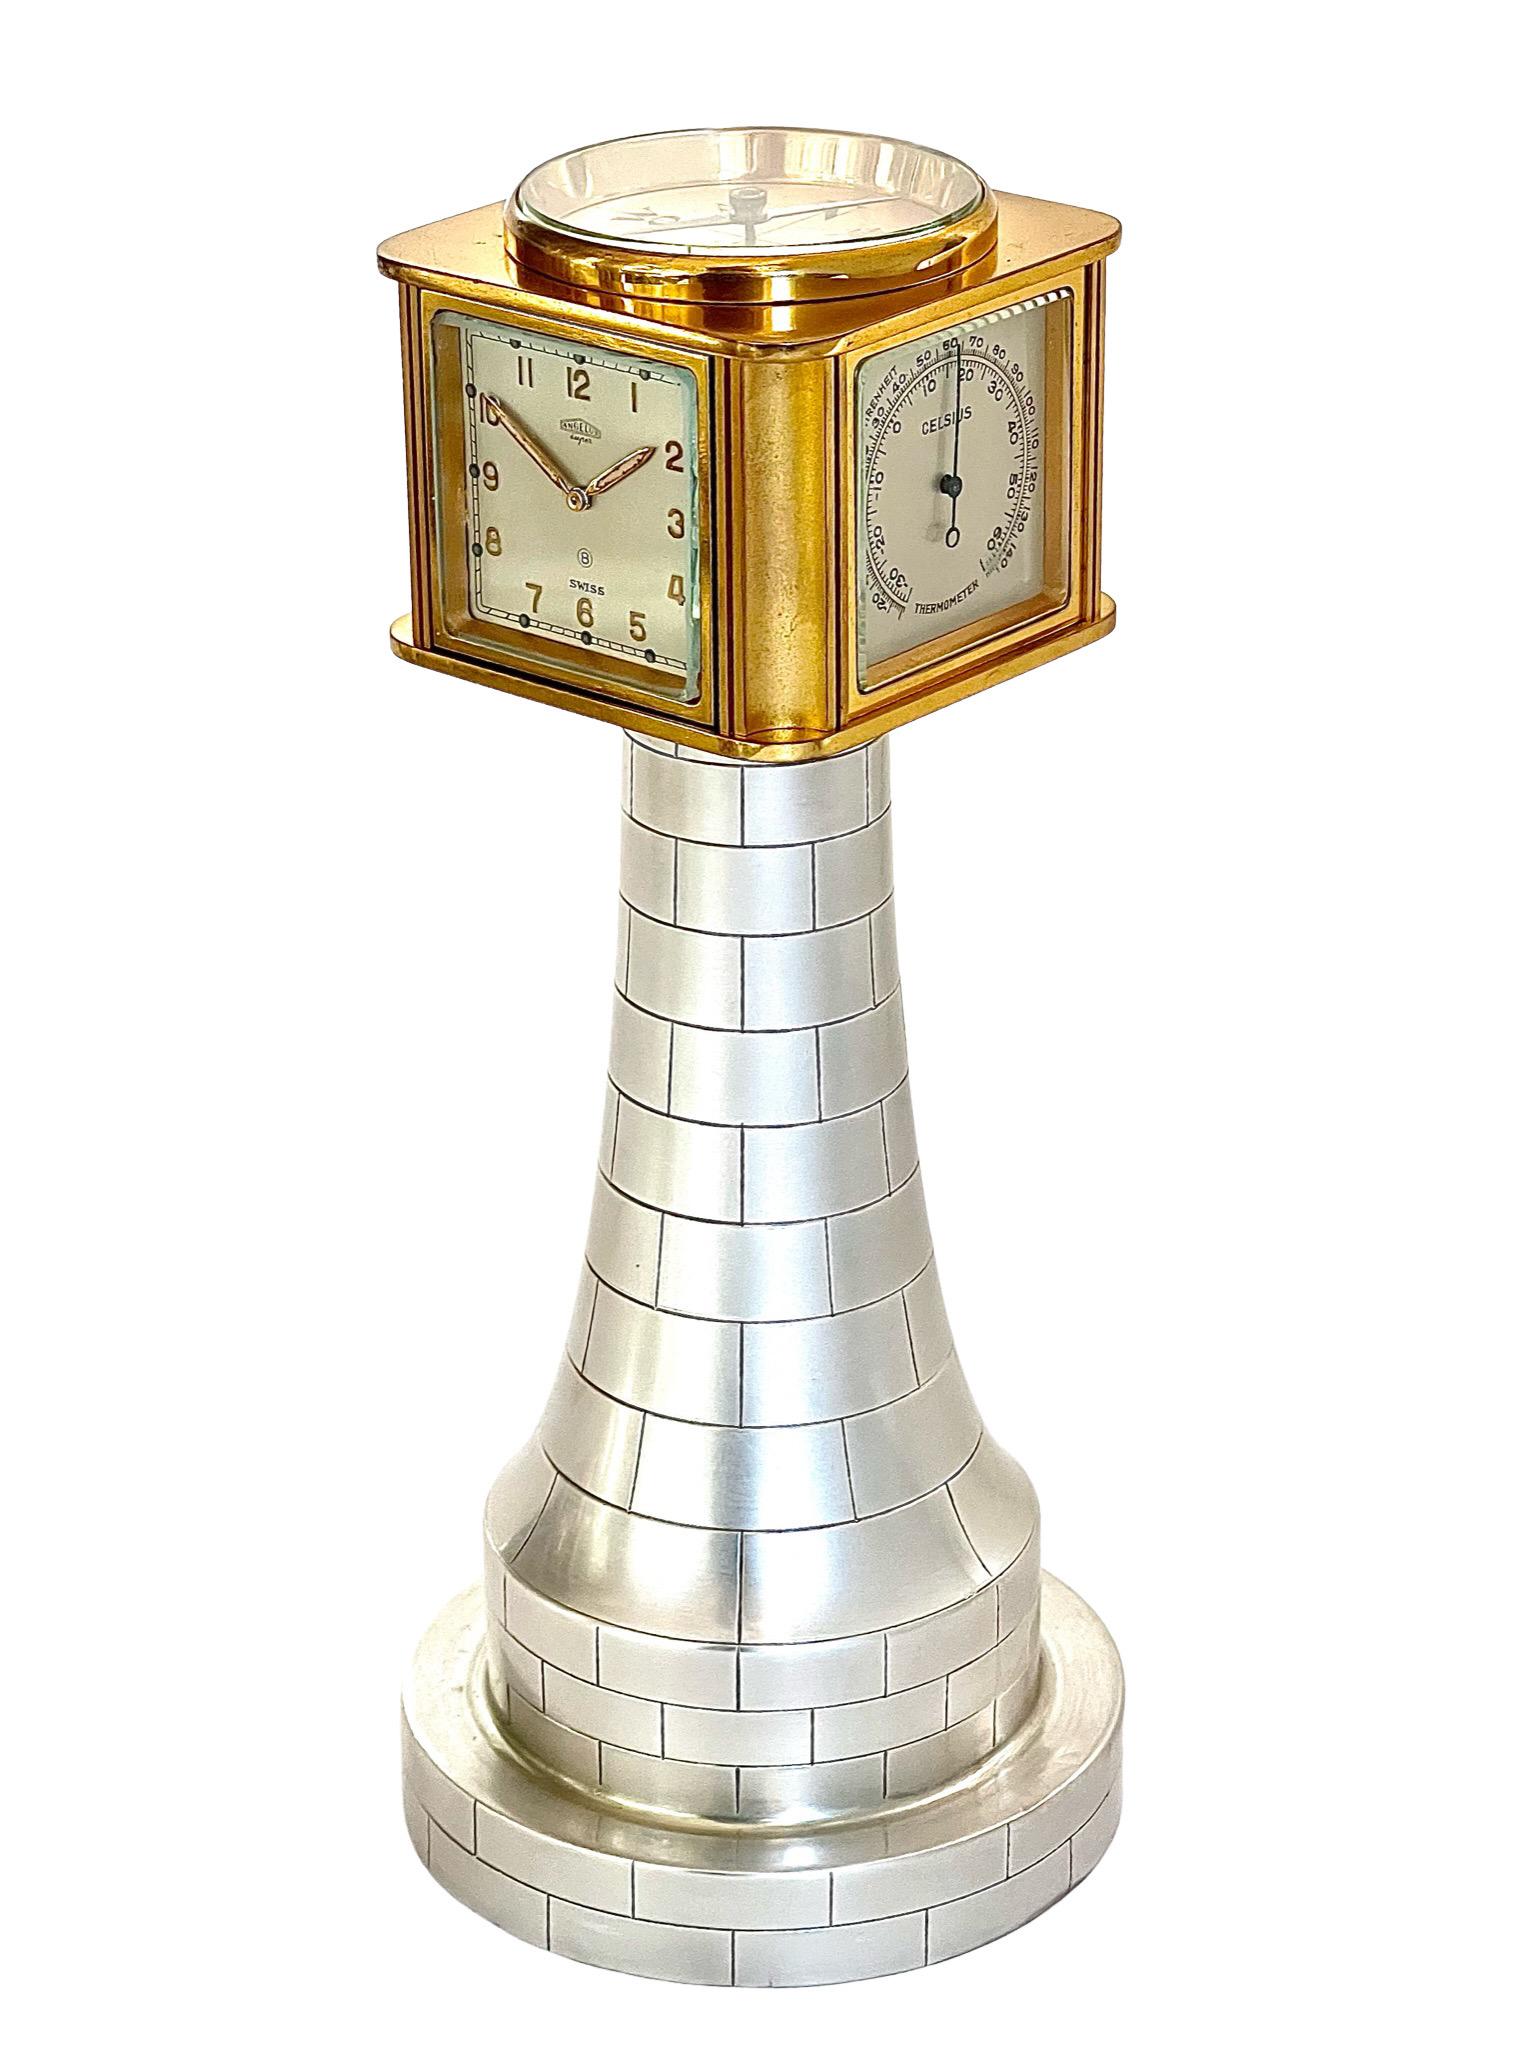 A midcentury eight day timepiece weather compendium by the renowned Swiss watch company, Angelus. The compendium takes on the charming form of a lighthouse, it's design is not only aesthetically pleasing but it also serves a practical purpose by